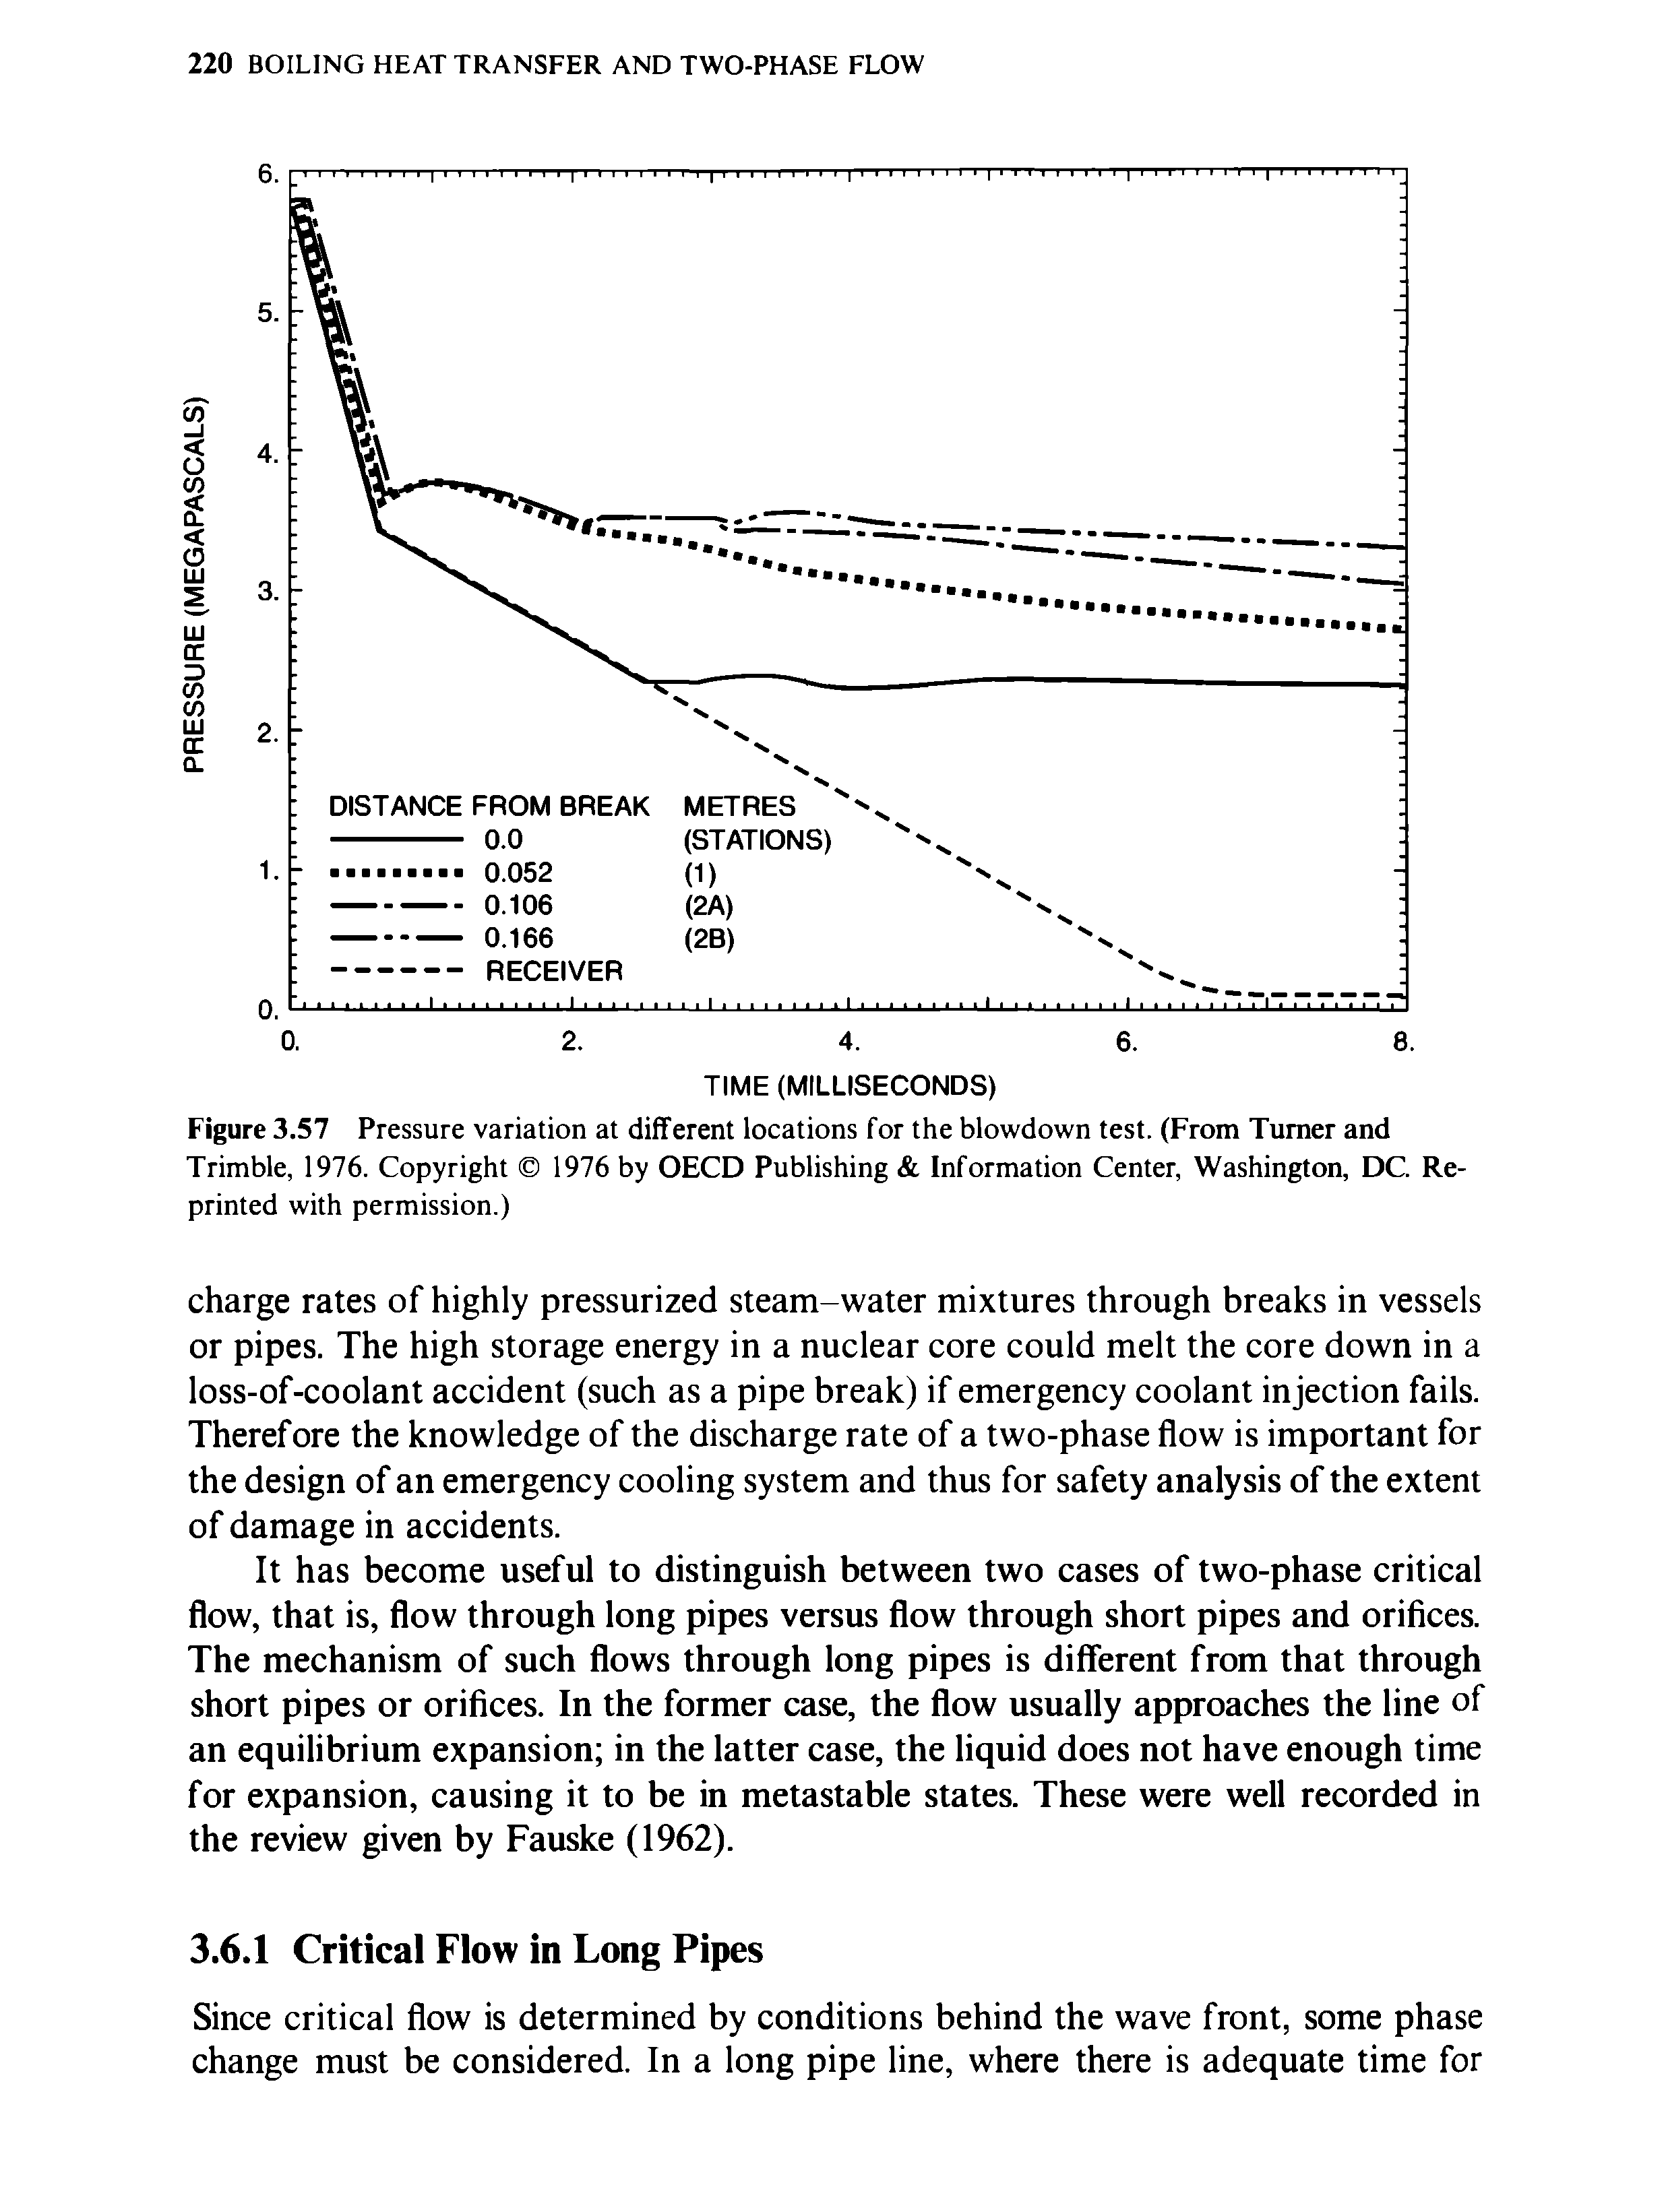 Figure 3.57 Pressure variation at different locations for the blowdown test. (From Turner and Trimble, 1976. Copyright 1976 by OECD Publishing Information Center, Washington, DC. Reprinted with permission.)...